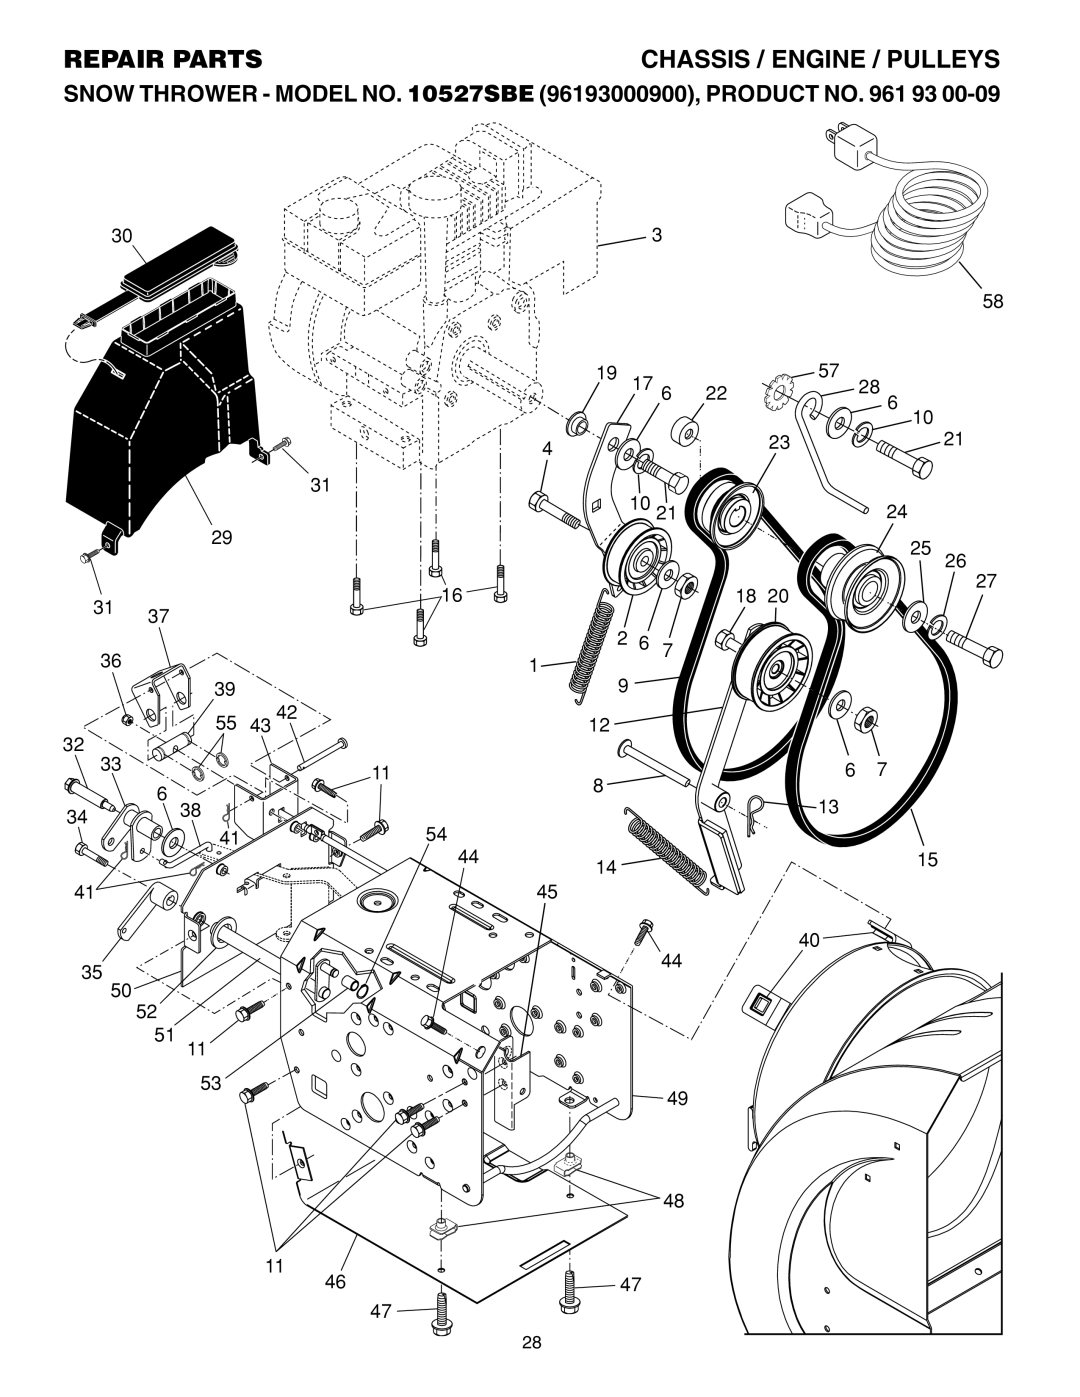 Husqvarna 10527SBE owner manual Chassis / Engine / Pulleys, Repair Parts 